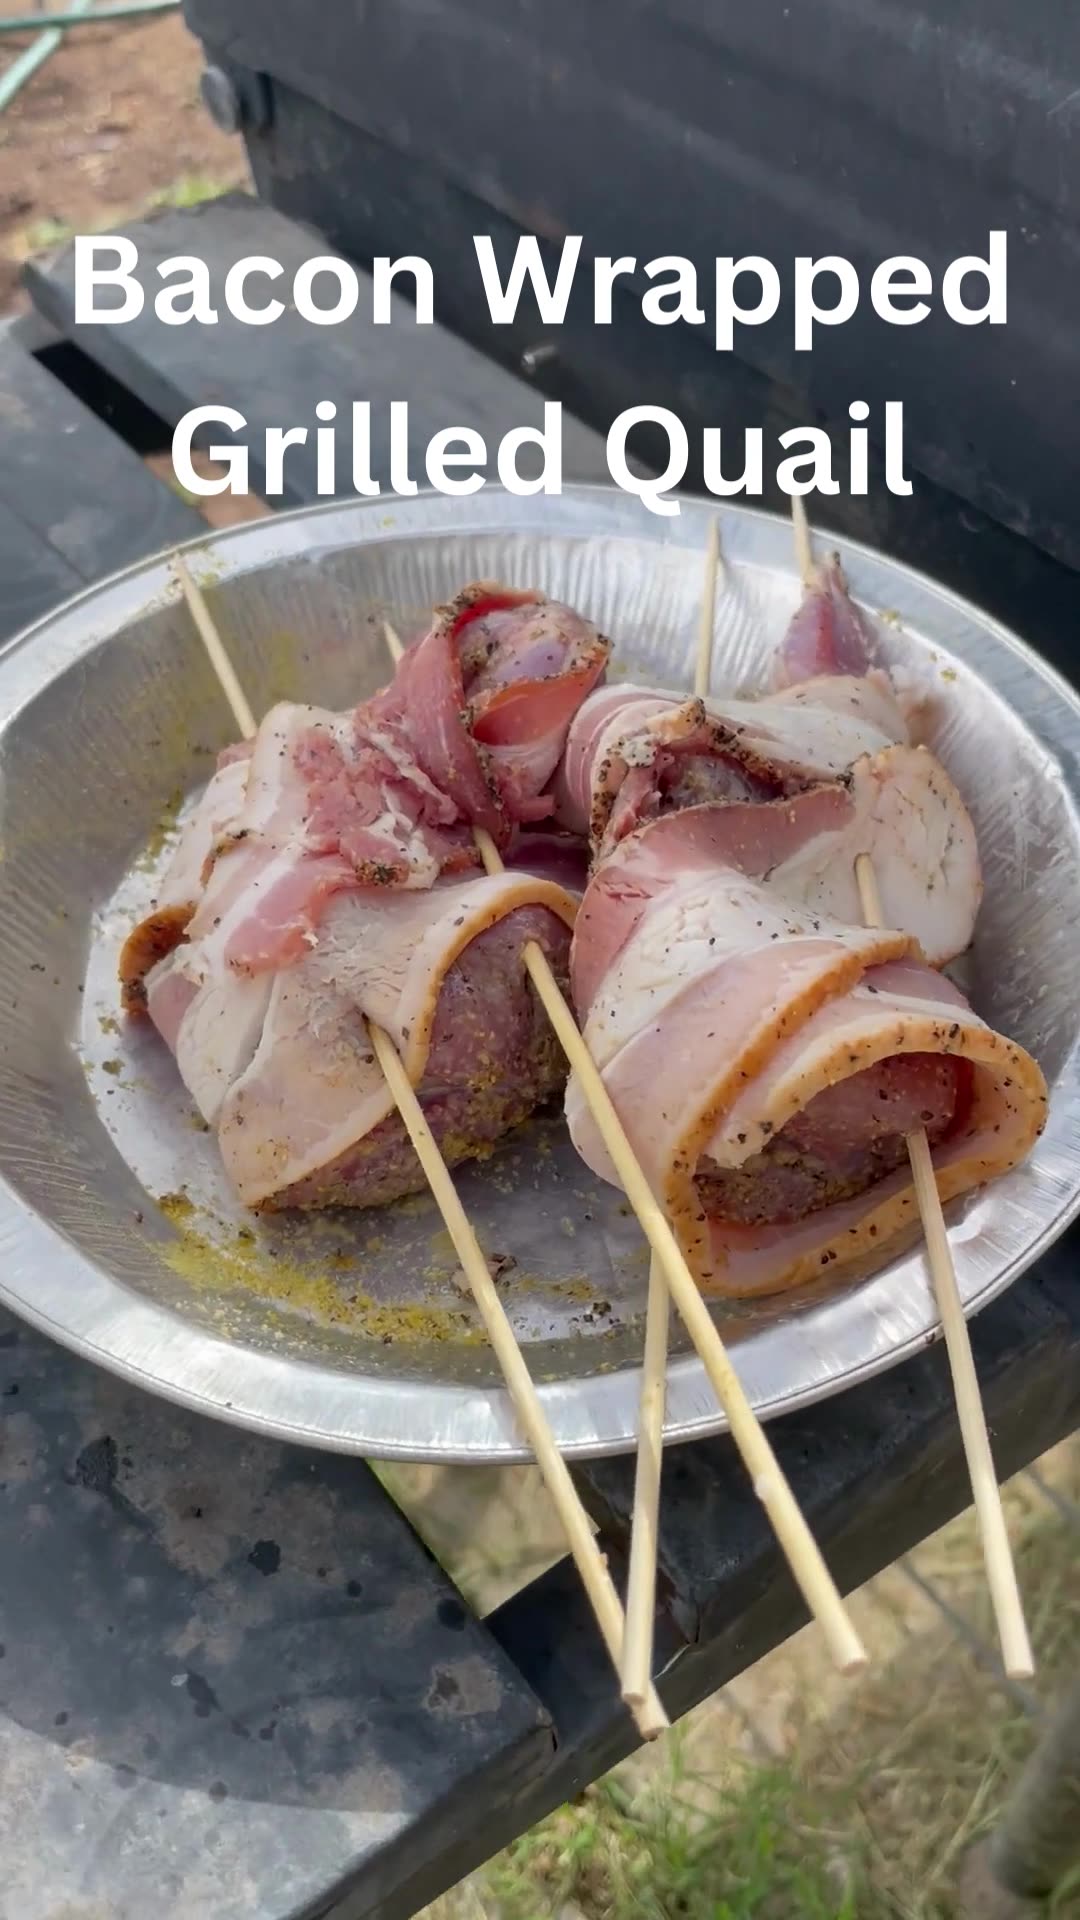 Bacon Wrapped Grilled Quail